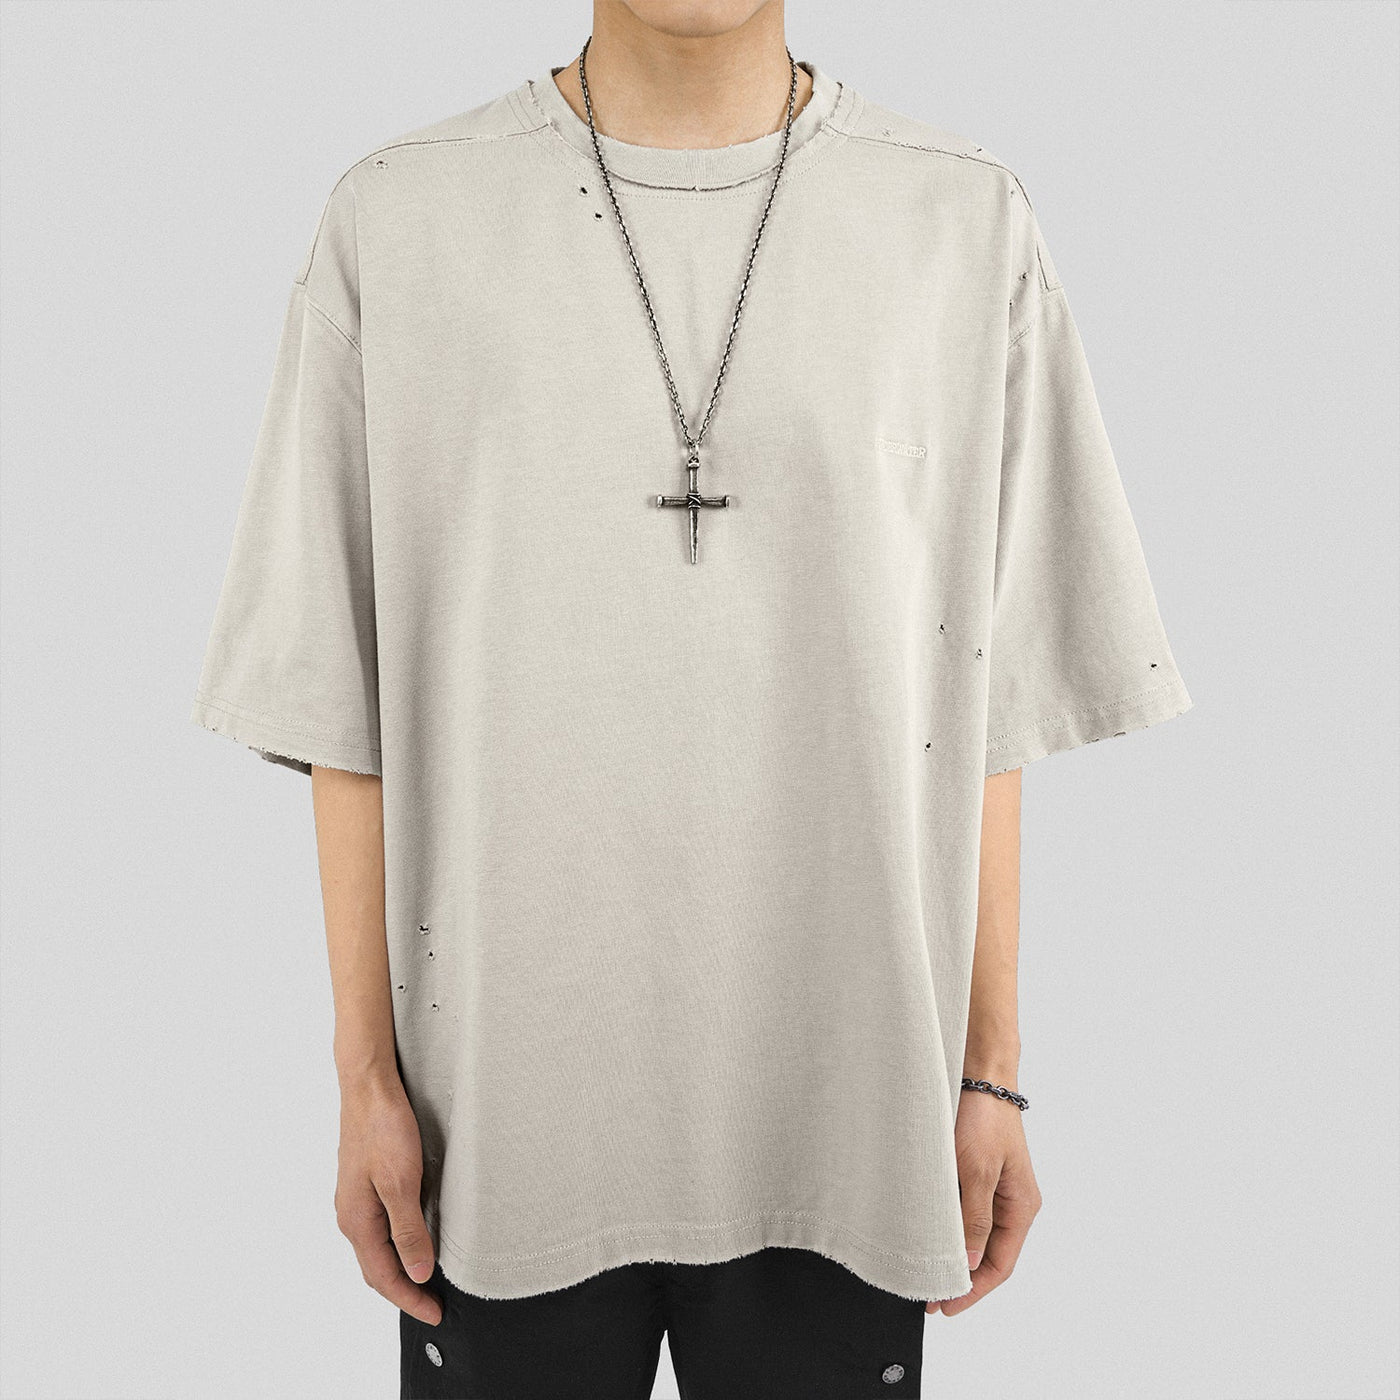 Solid Distressed Hole T-Shirt Korean Street Fashion T-Shirt By Underwater Shop Online at OH Vault